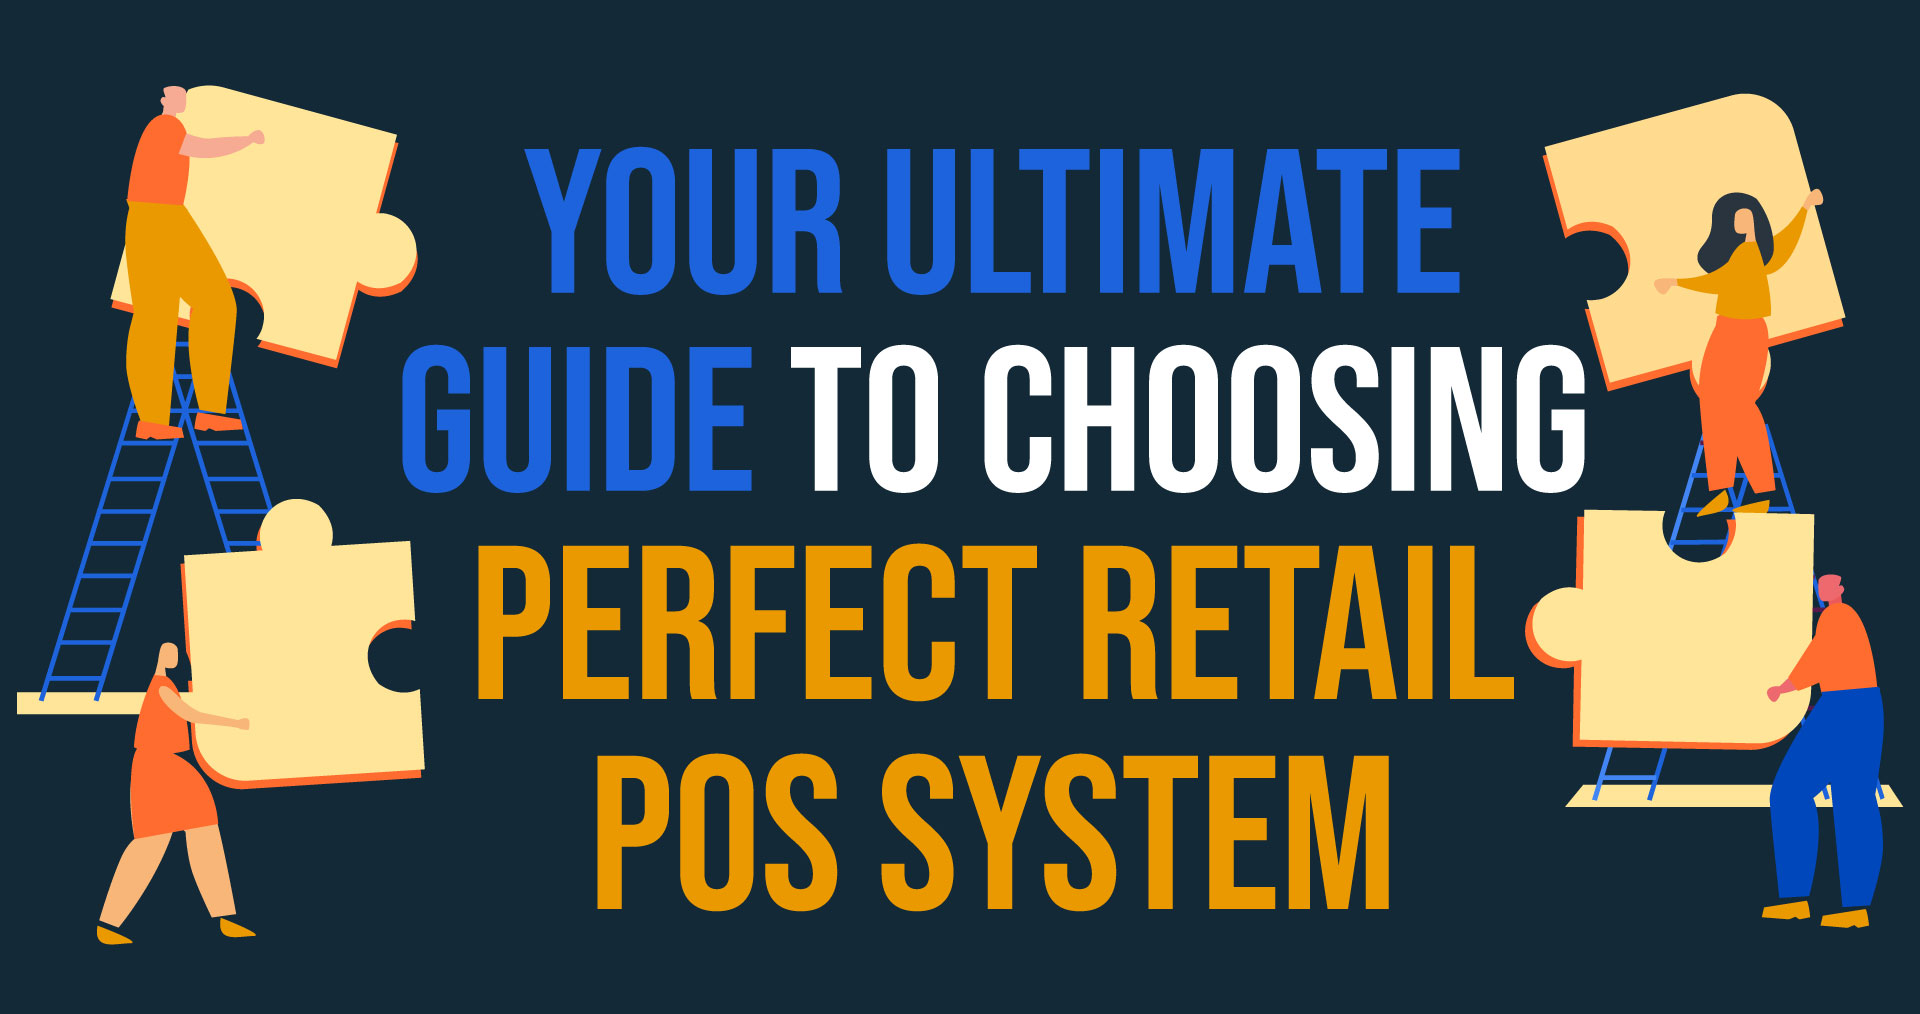 POS system for retail stores [Infographic]